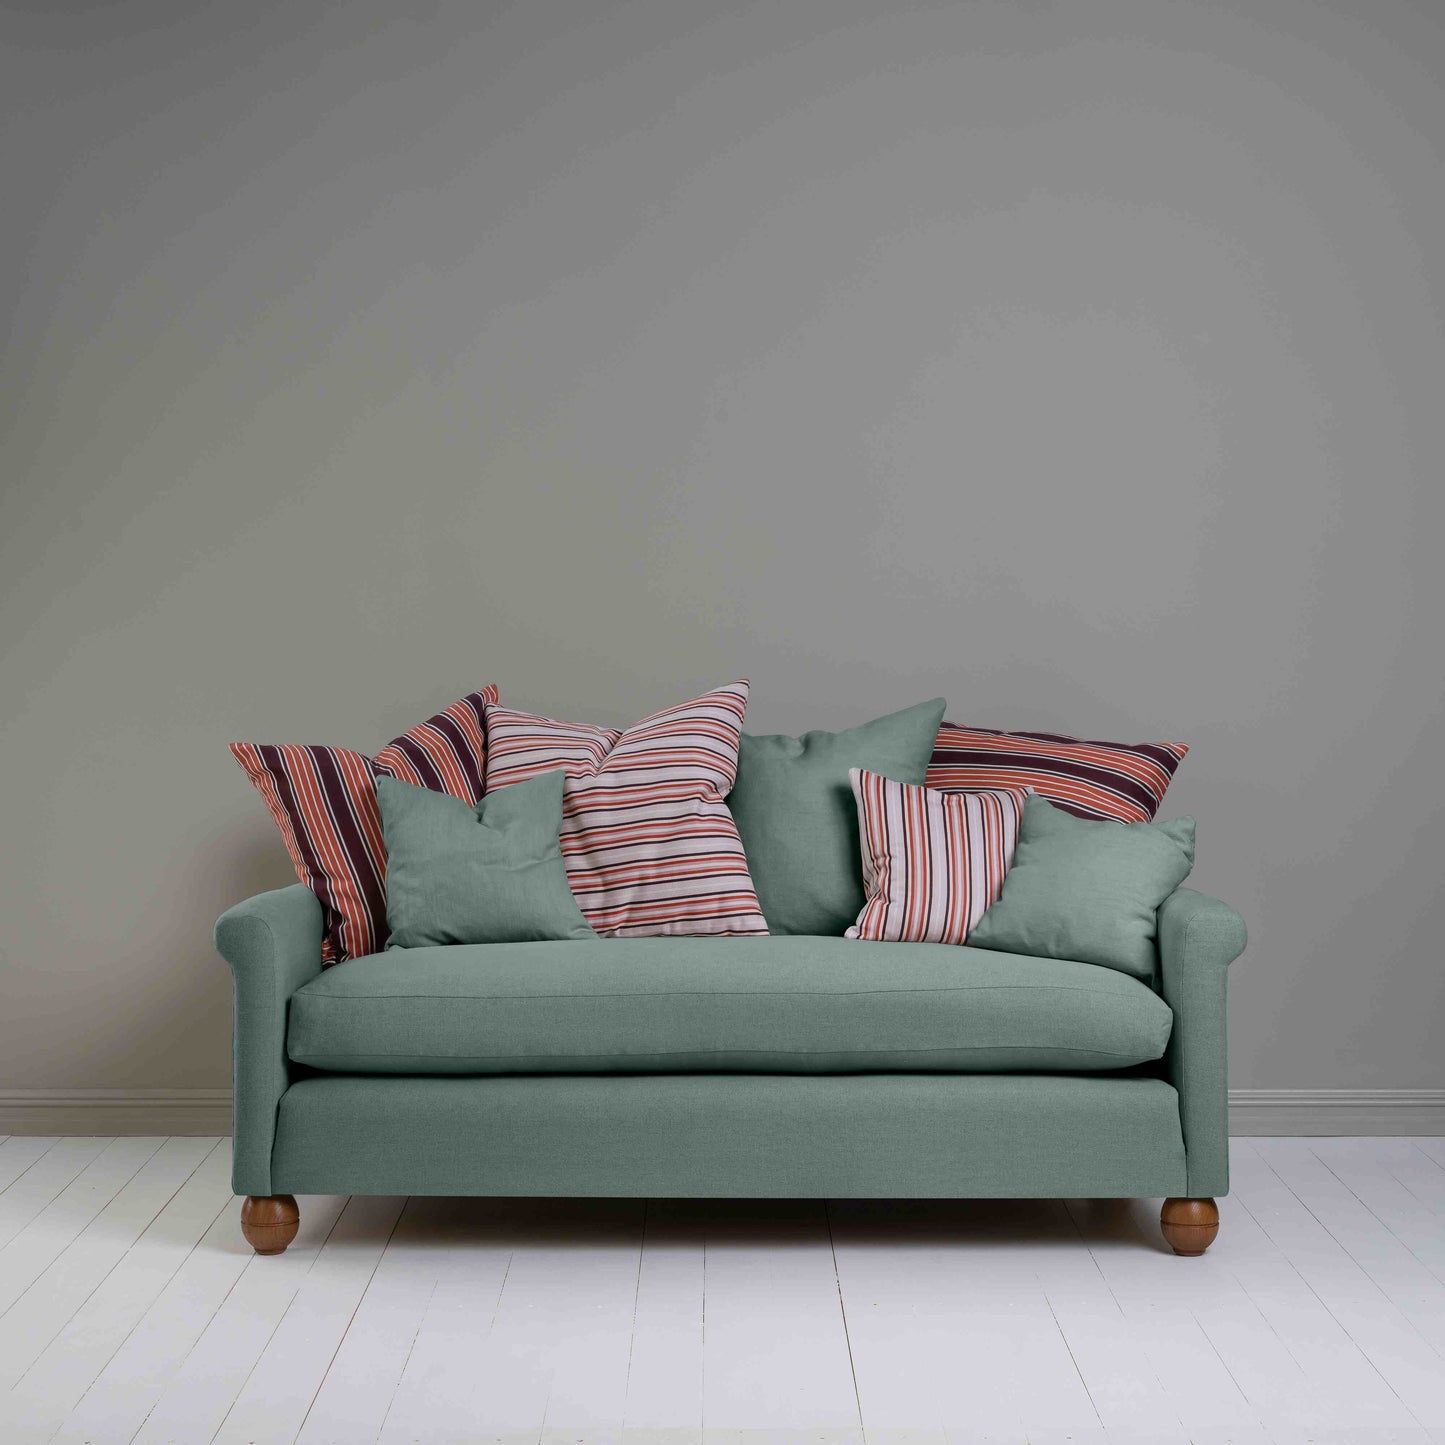 Idler 3 Seater Sofa in Laidback Linen Mineral